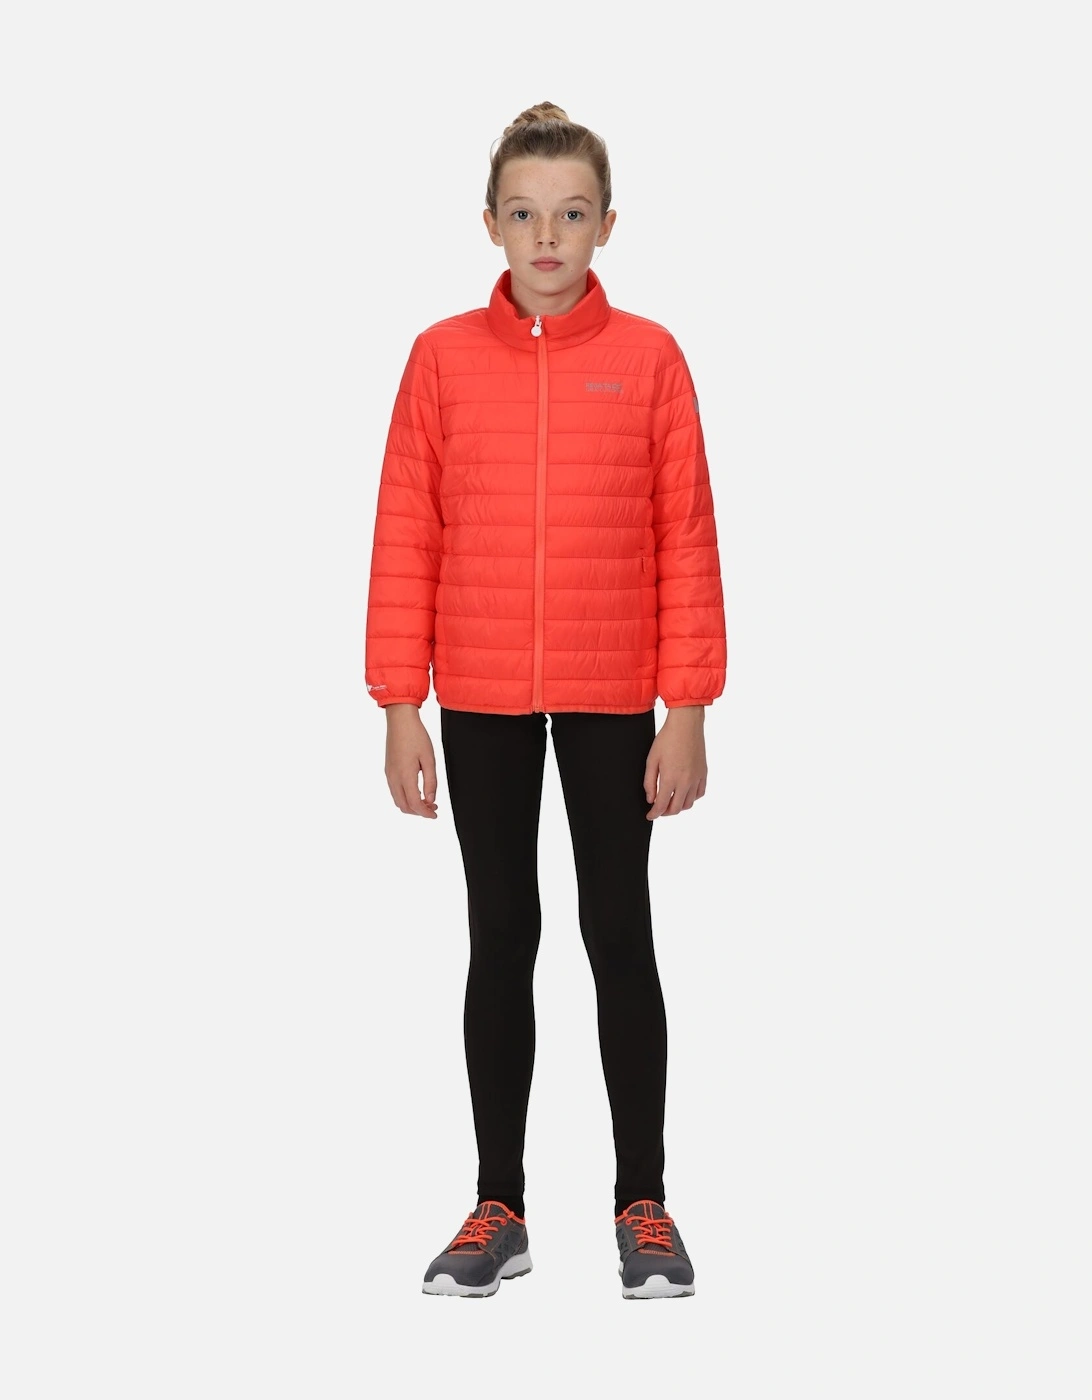 Childrens/Kids Hillpack Quilted Insulated Jacket